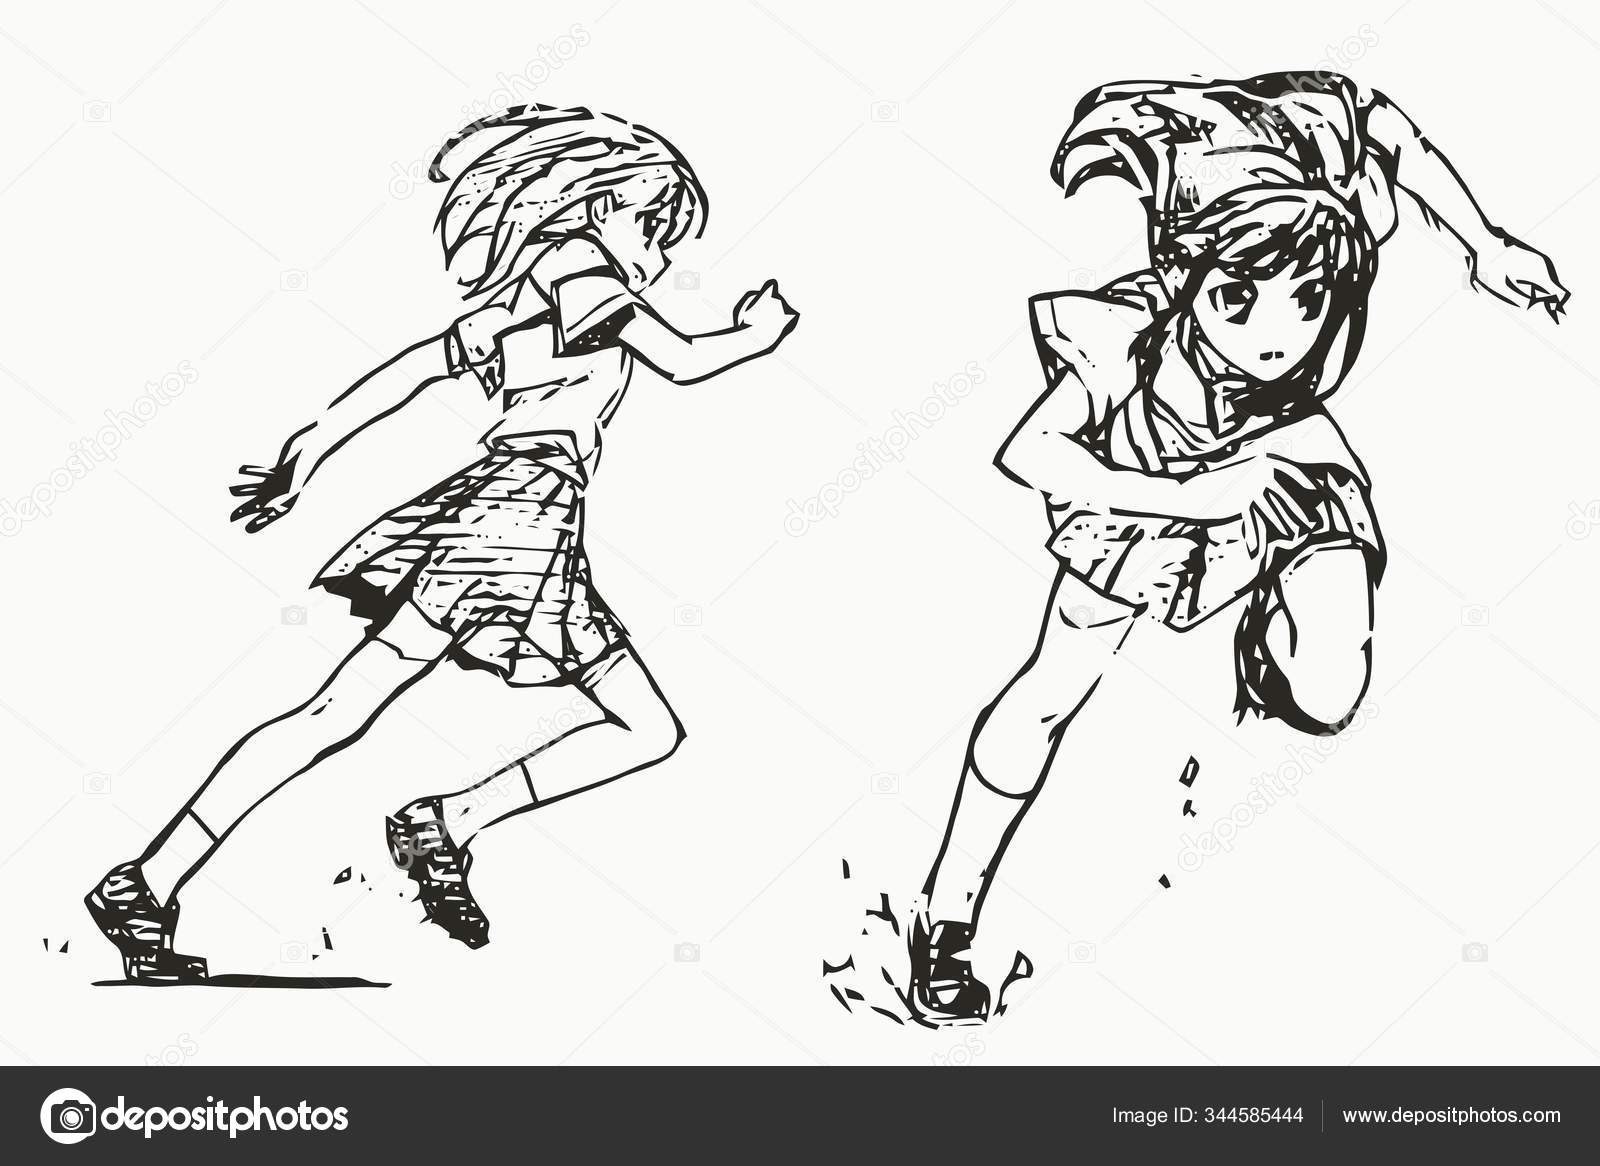 Anime Poses Drawing Reference Anime Body Sketch Cute Girl Manga Stock Photo Image By C Satoshy 344585444 Either that or just look at. https depositphotos com 344585444 stock photo anime poses drawing reference anime html